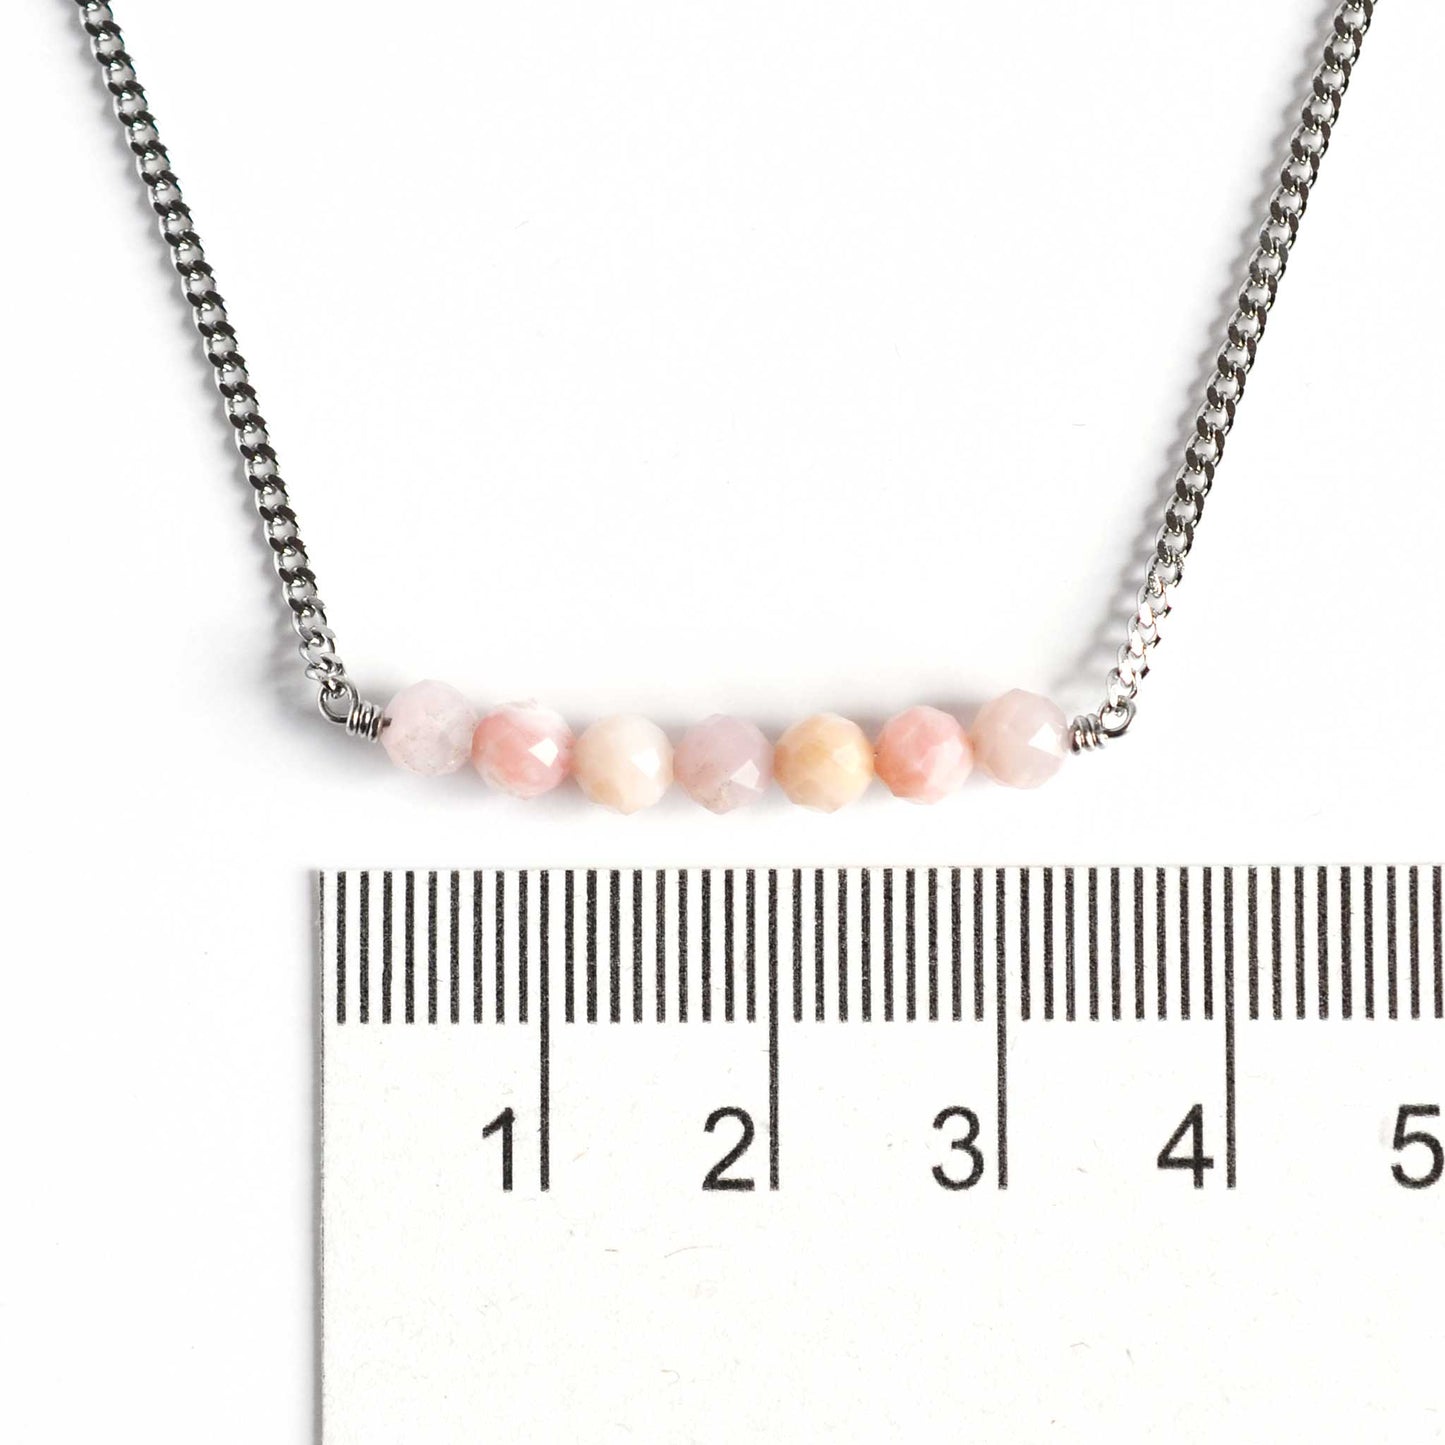 Dainty Pink Opal necklace with 4mm gemstone beads next to ruler